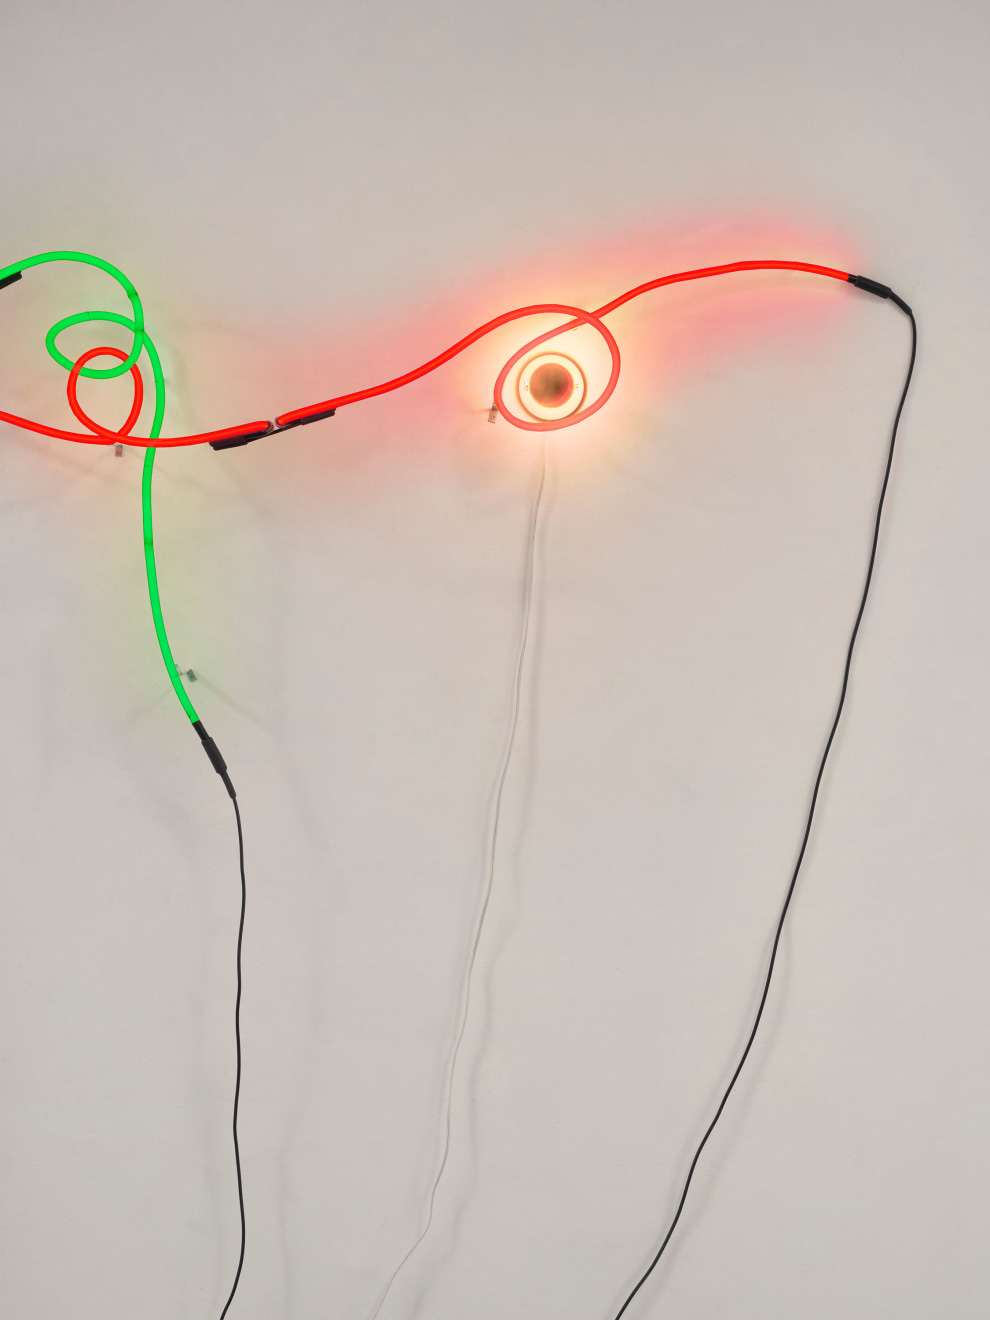 Keith Sonnier, Neon Wrapping Incandescent V, 1970